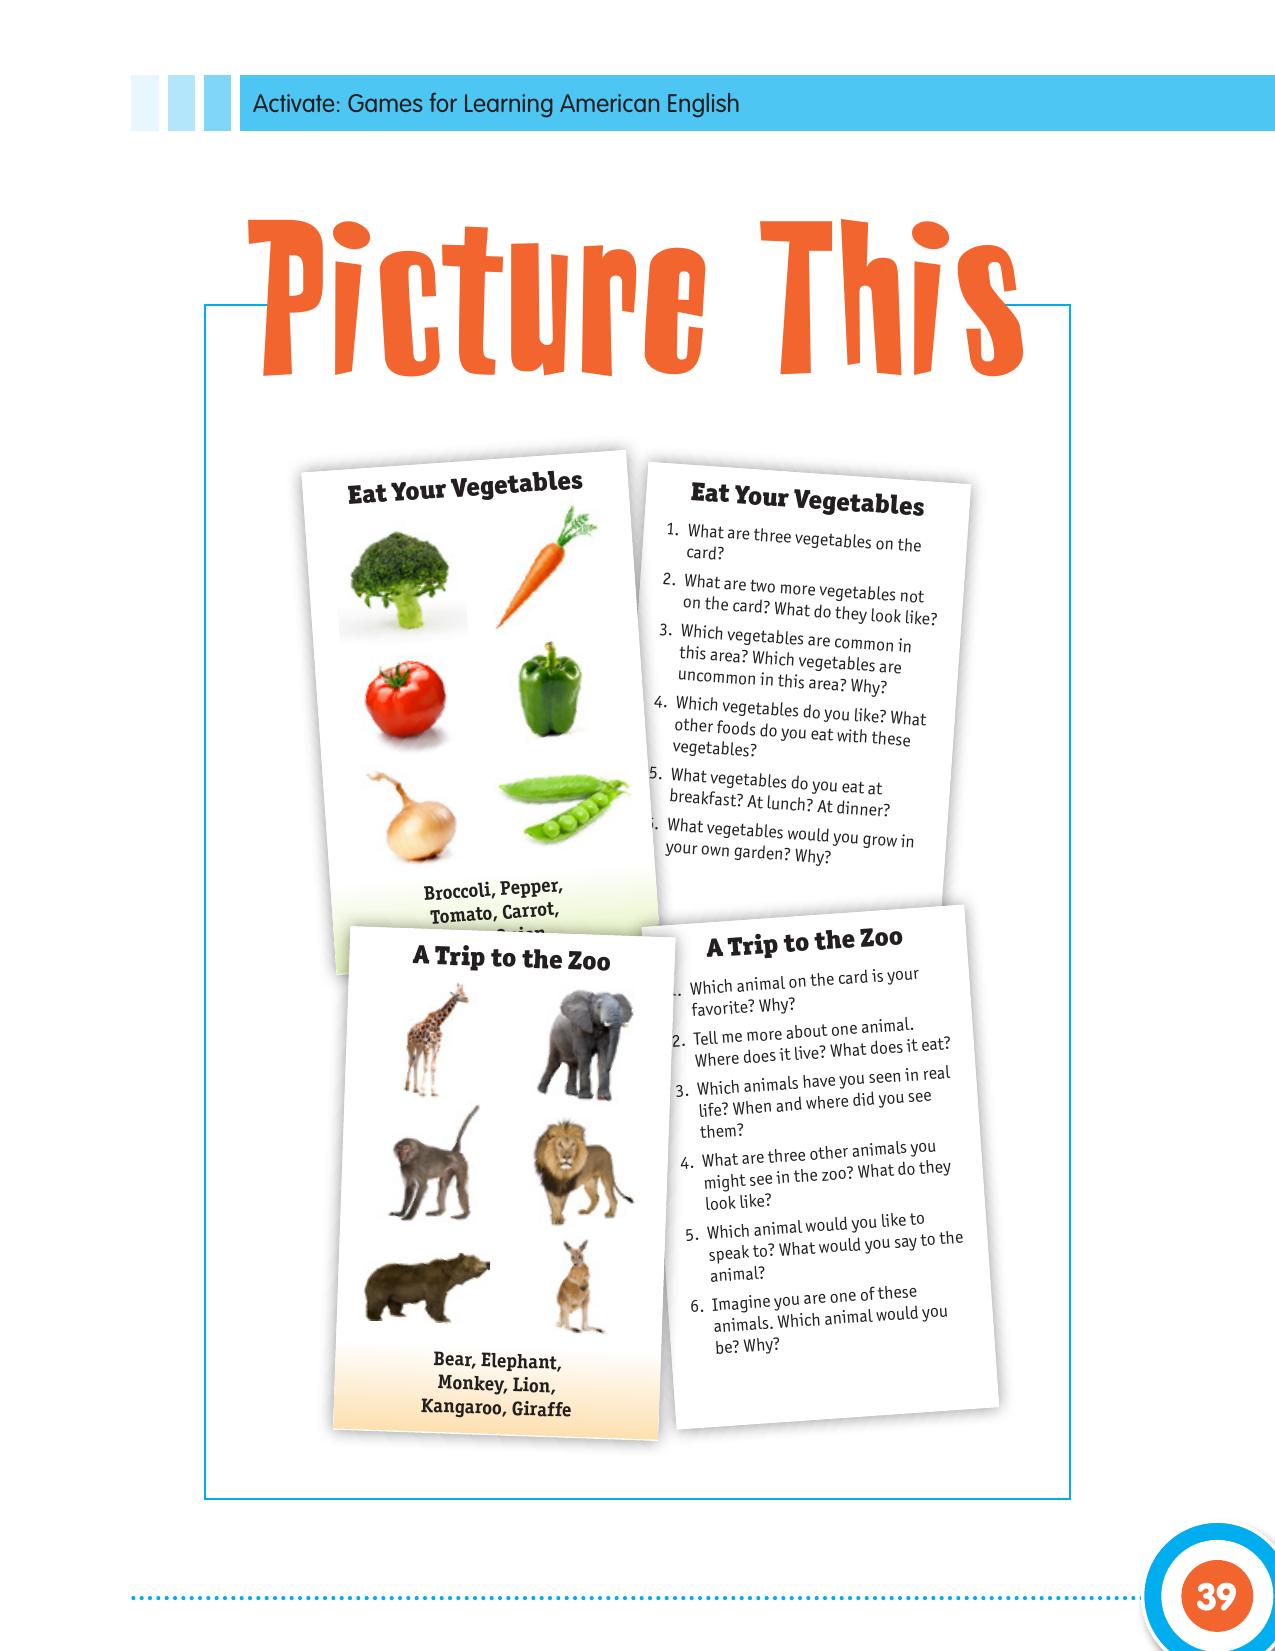 Picture This: Game for learning American English